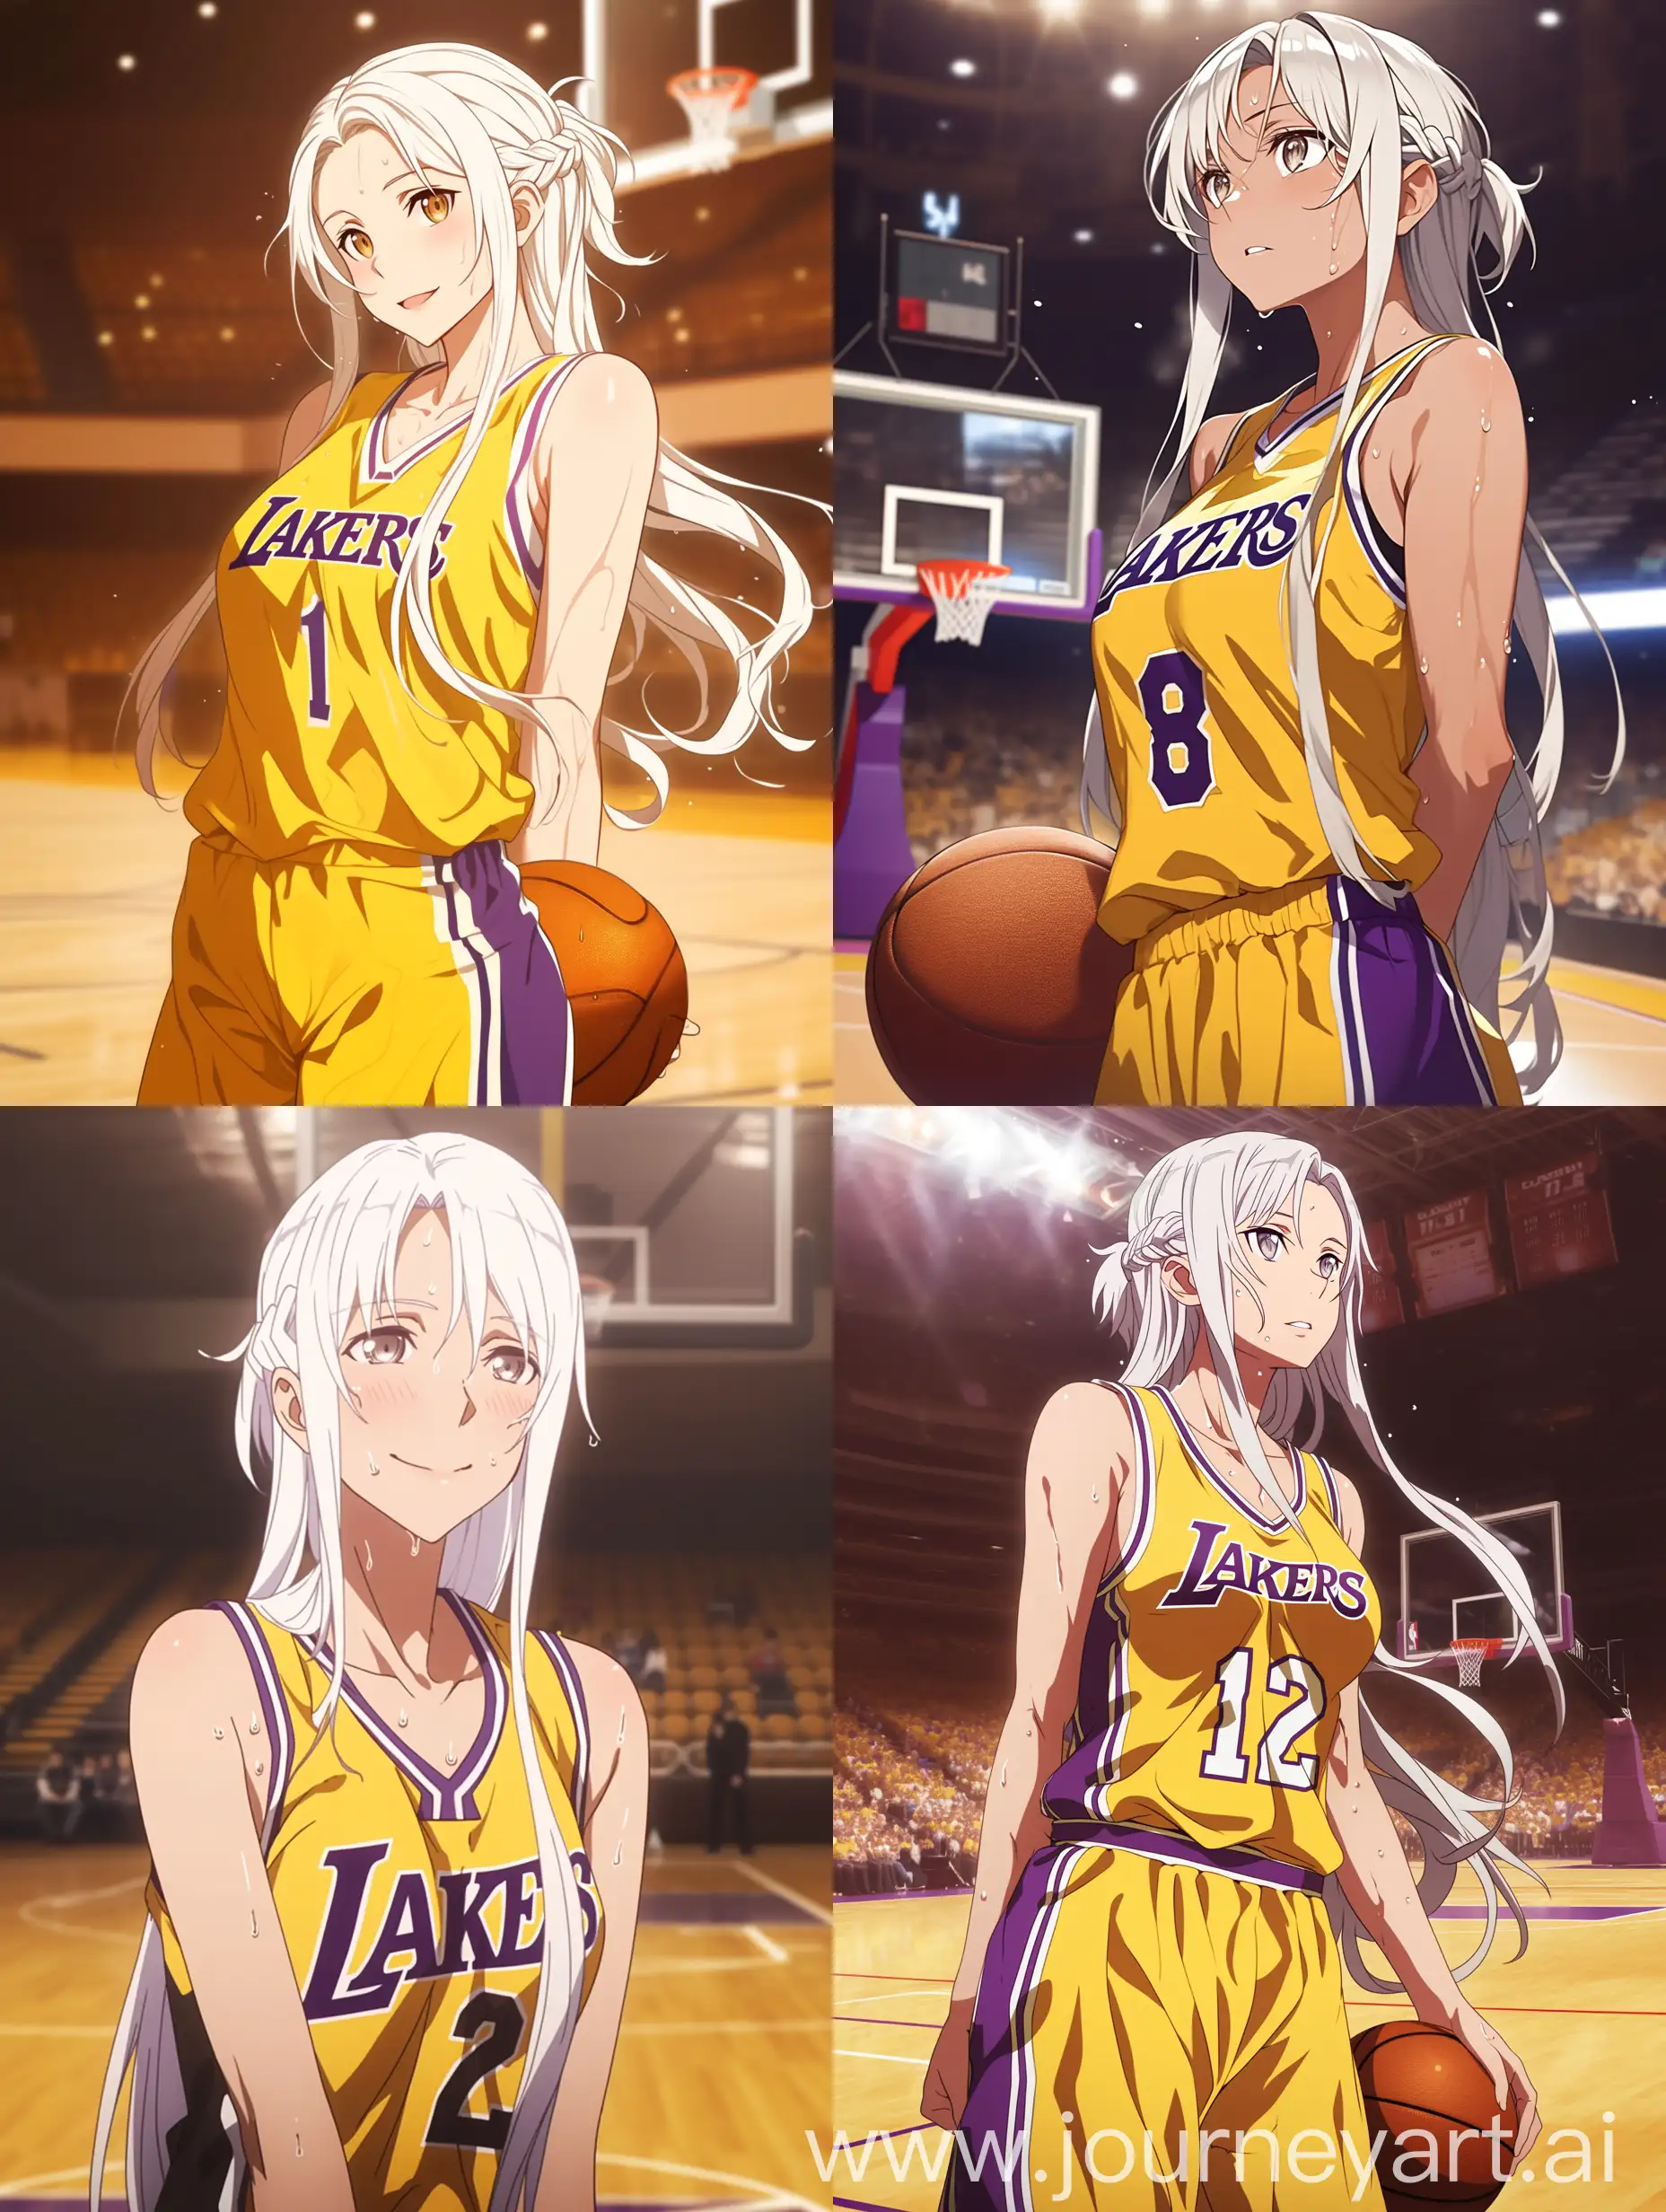 Asuna-from-Sword-Art-Online-in-Lakers-Basketball-Uniform-on-Court